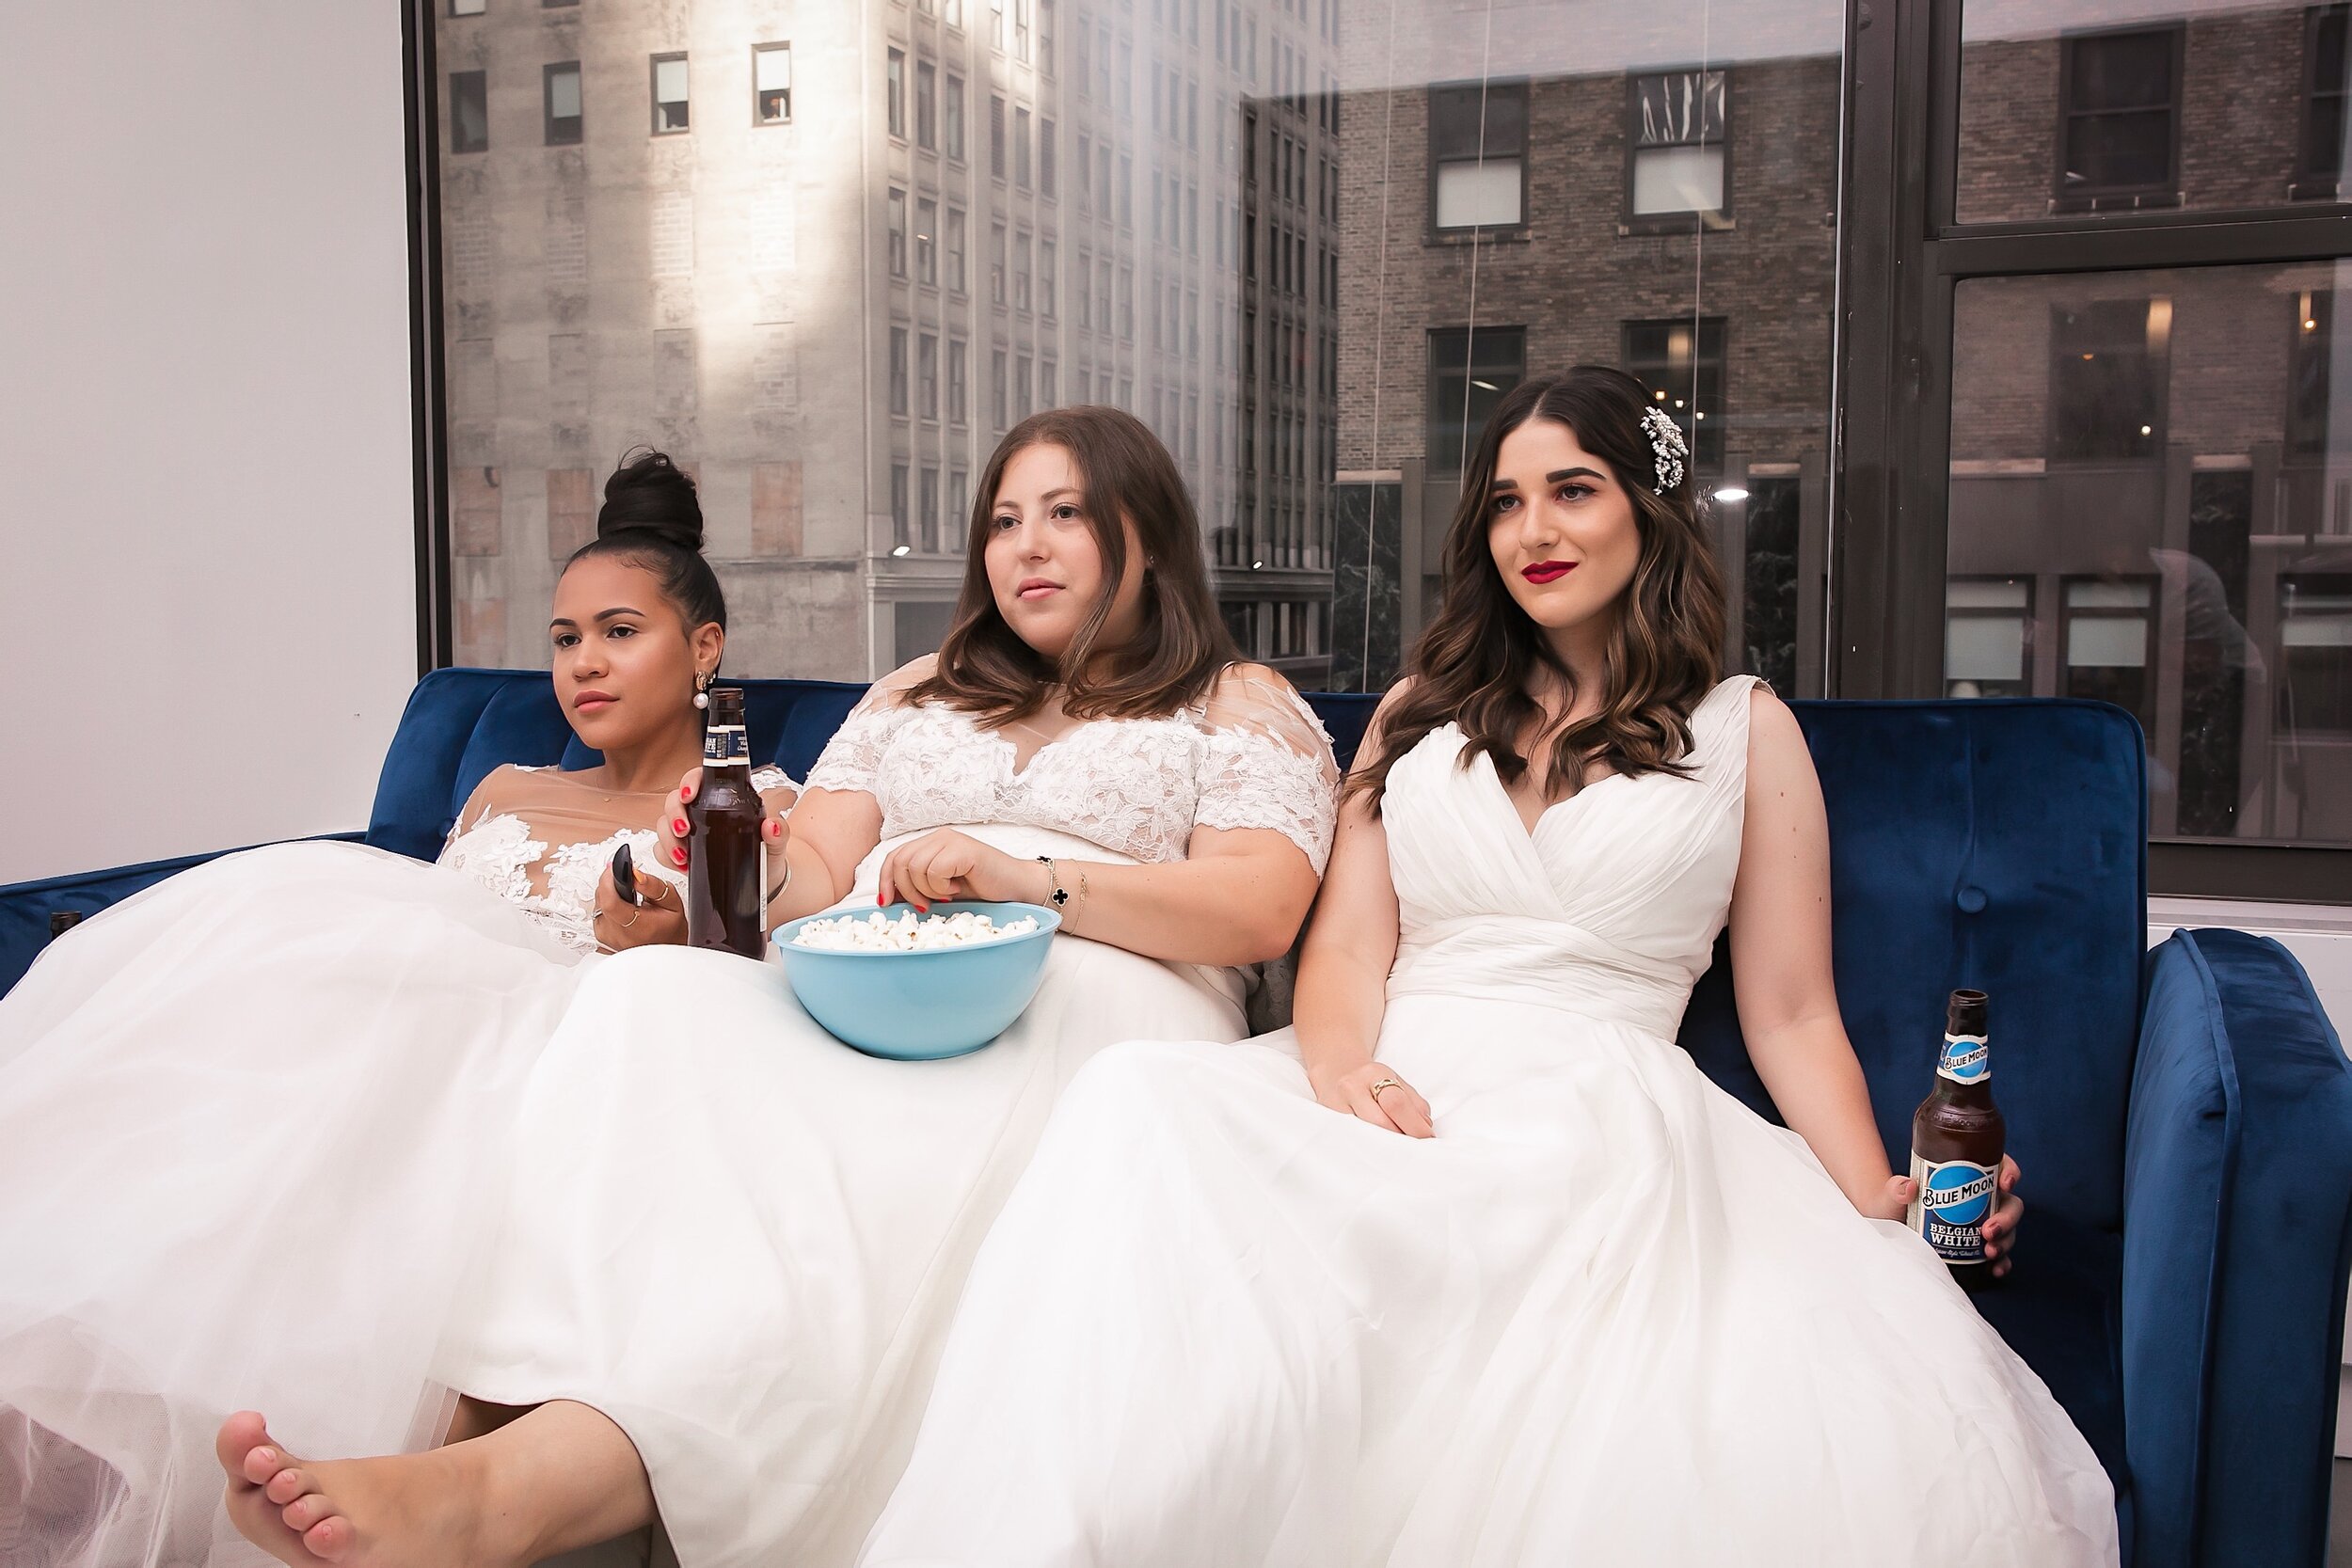 Recreating A Scene From Friends How To Plan A Group Photoshoot Esther Santer NYC Blogging Photoshoot Wedding Dresses Gowns White Rachel Monica Phoebe Popcorn Coffee Movie Night Funny  Cosplay Bridal Hair Pretty Beautiful  Girls Women Beer Style Trend.JPG